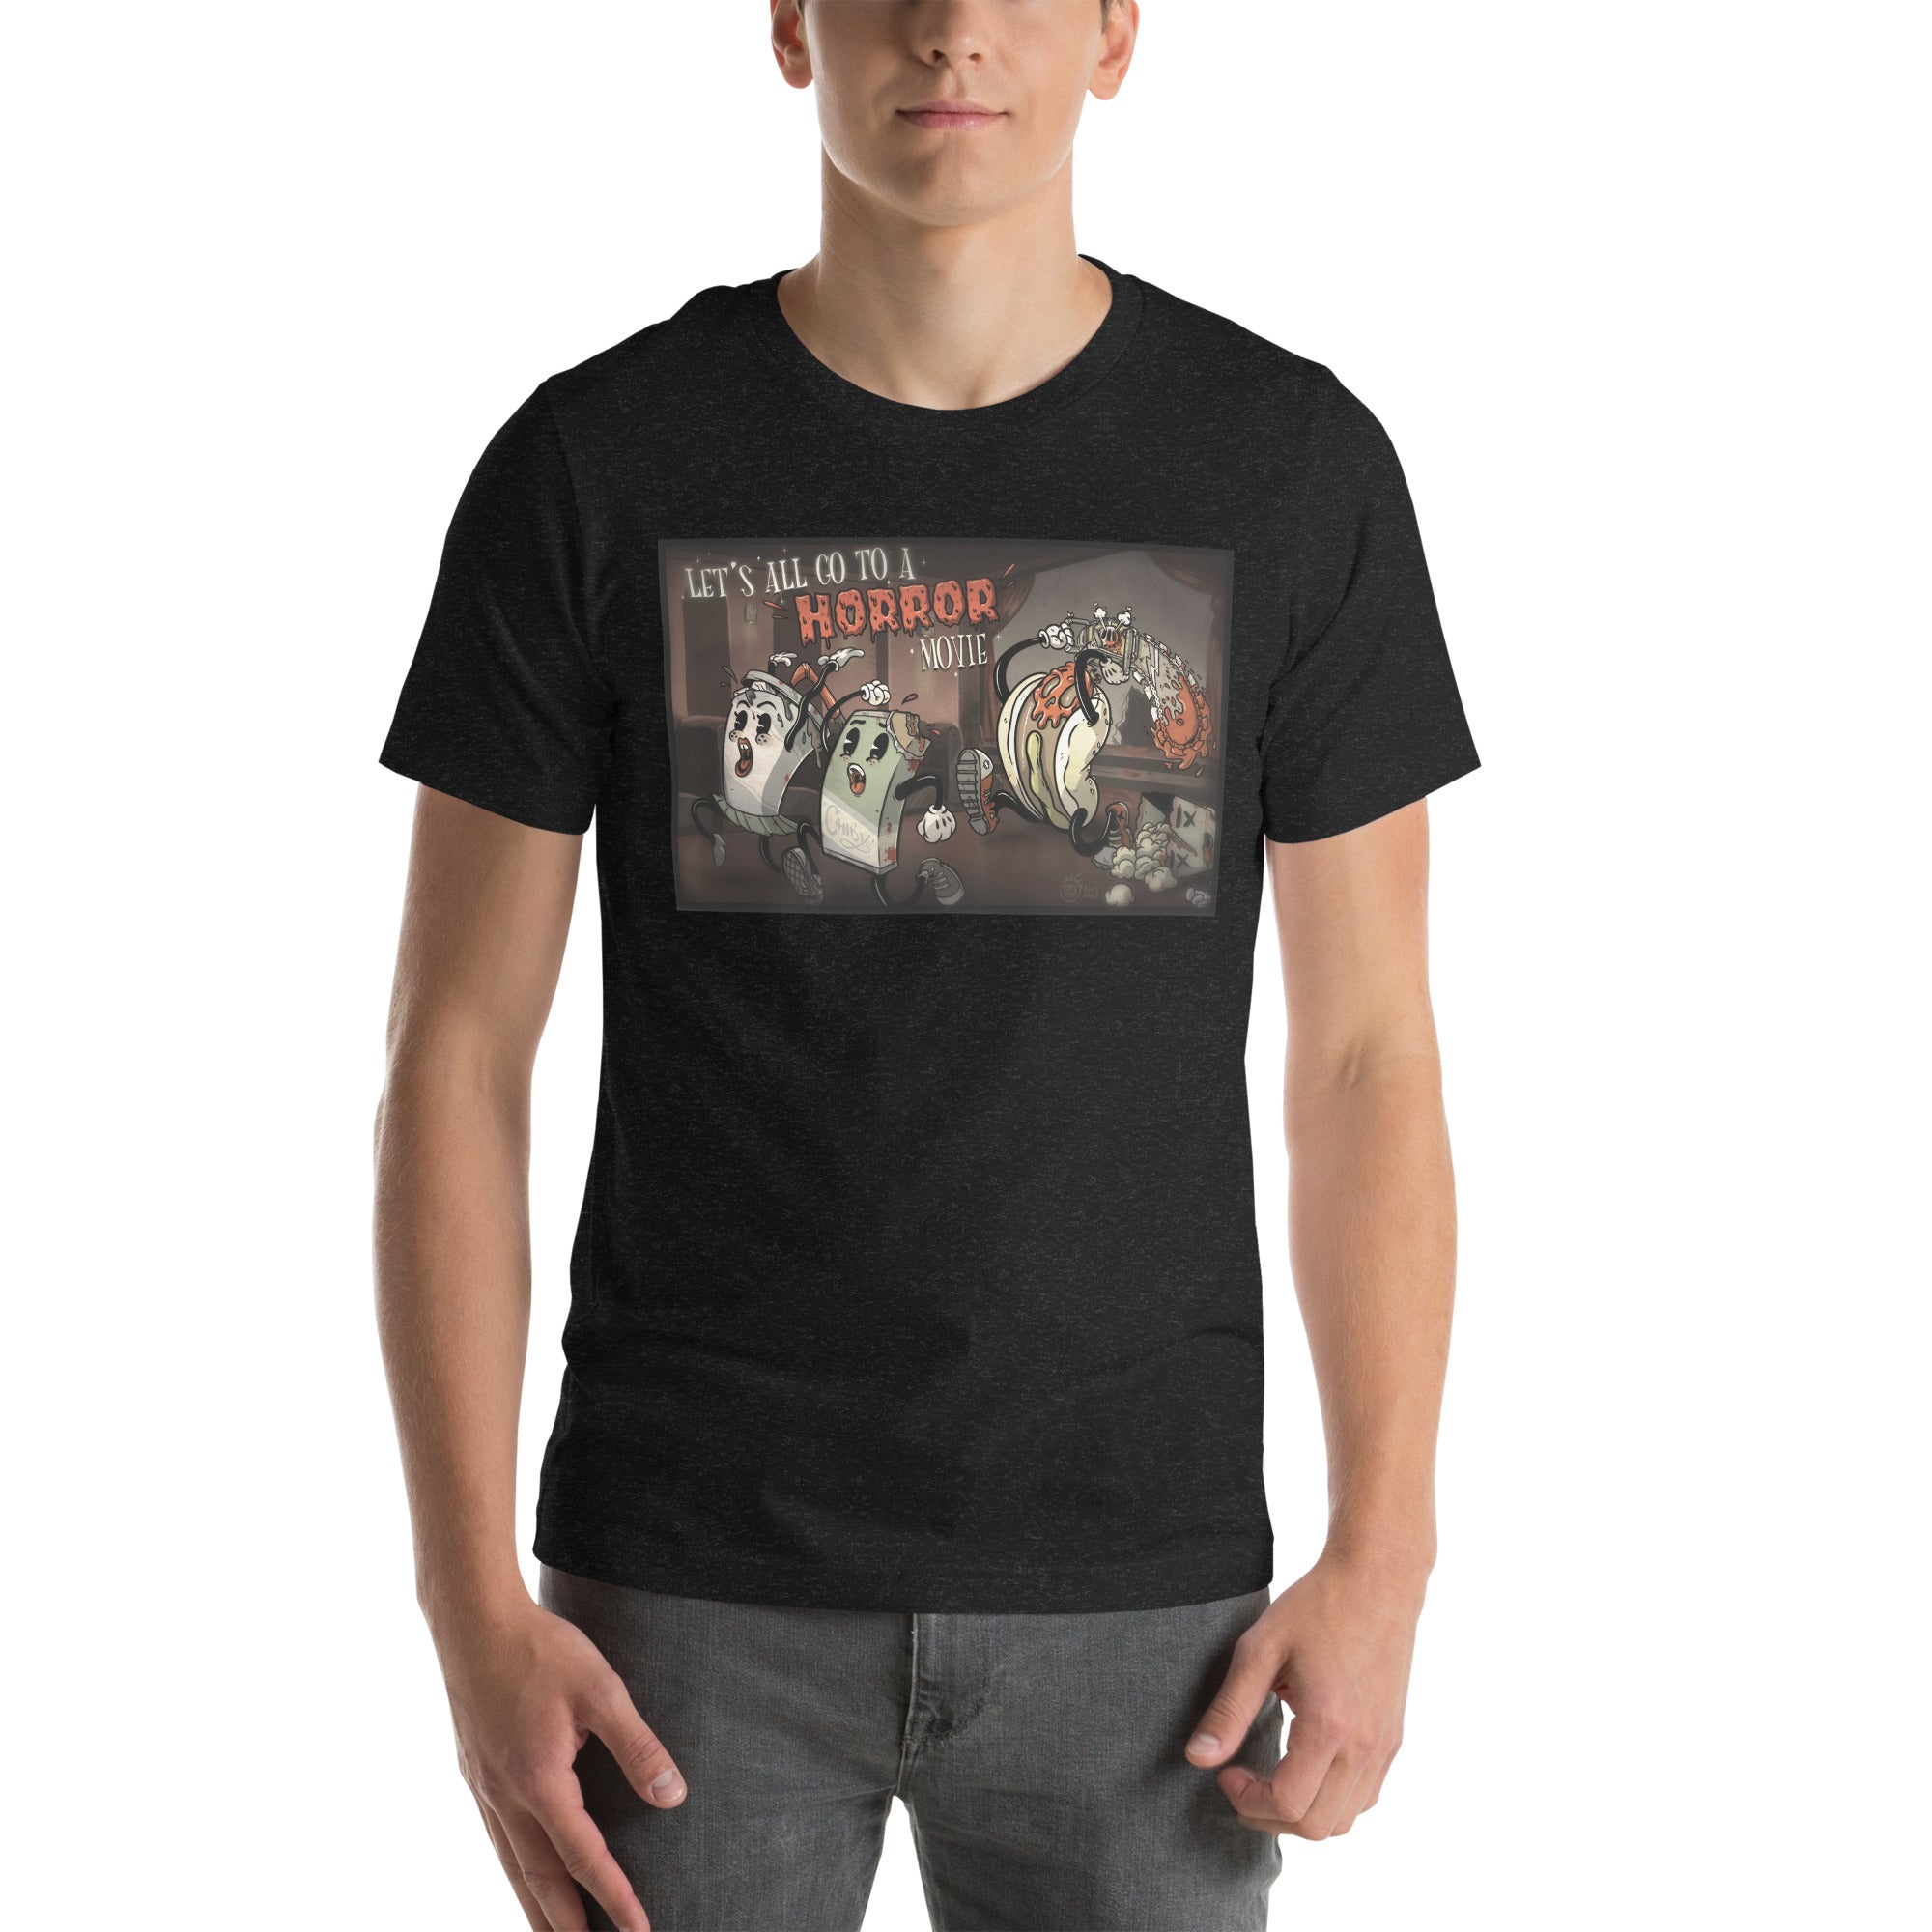 Let's all go to a Horror Movie - Unisex t-shirt